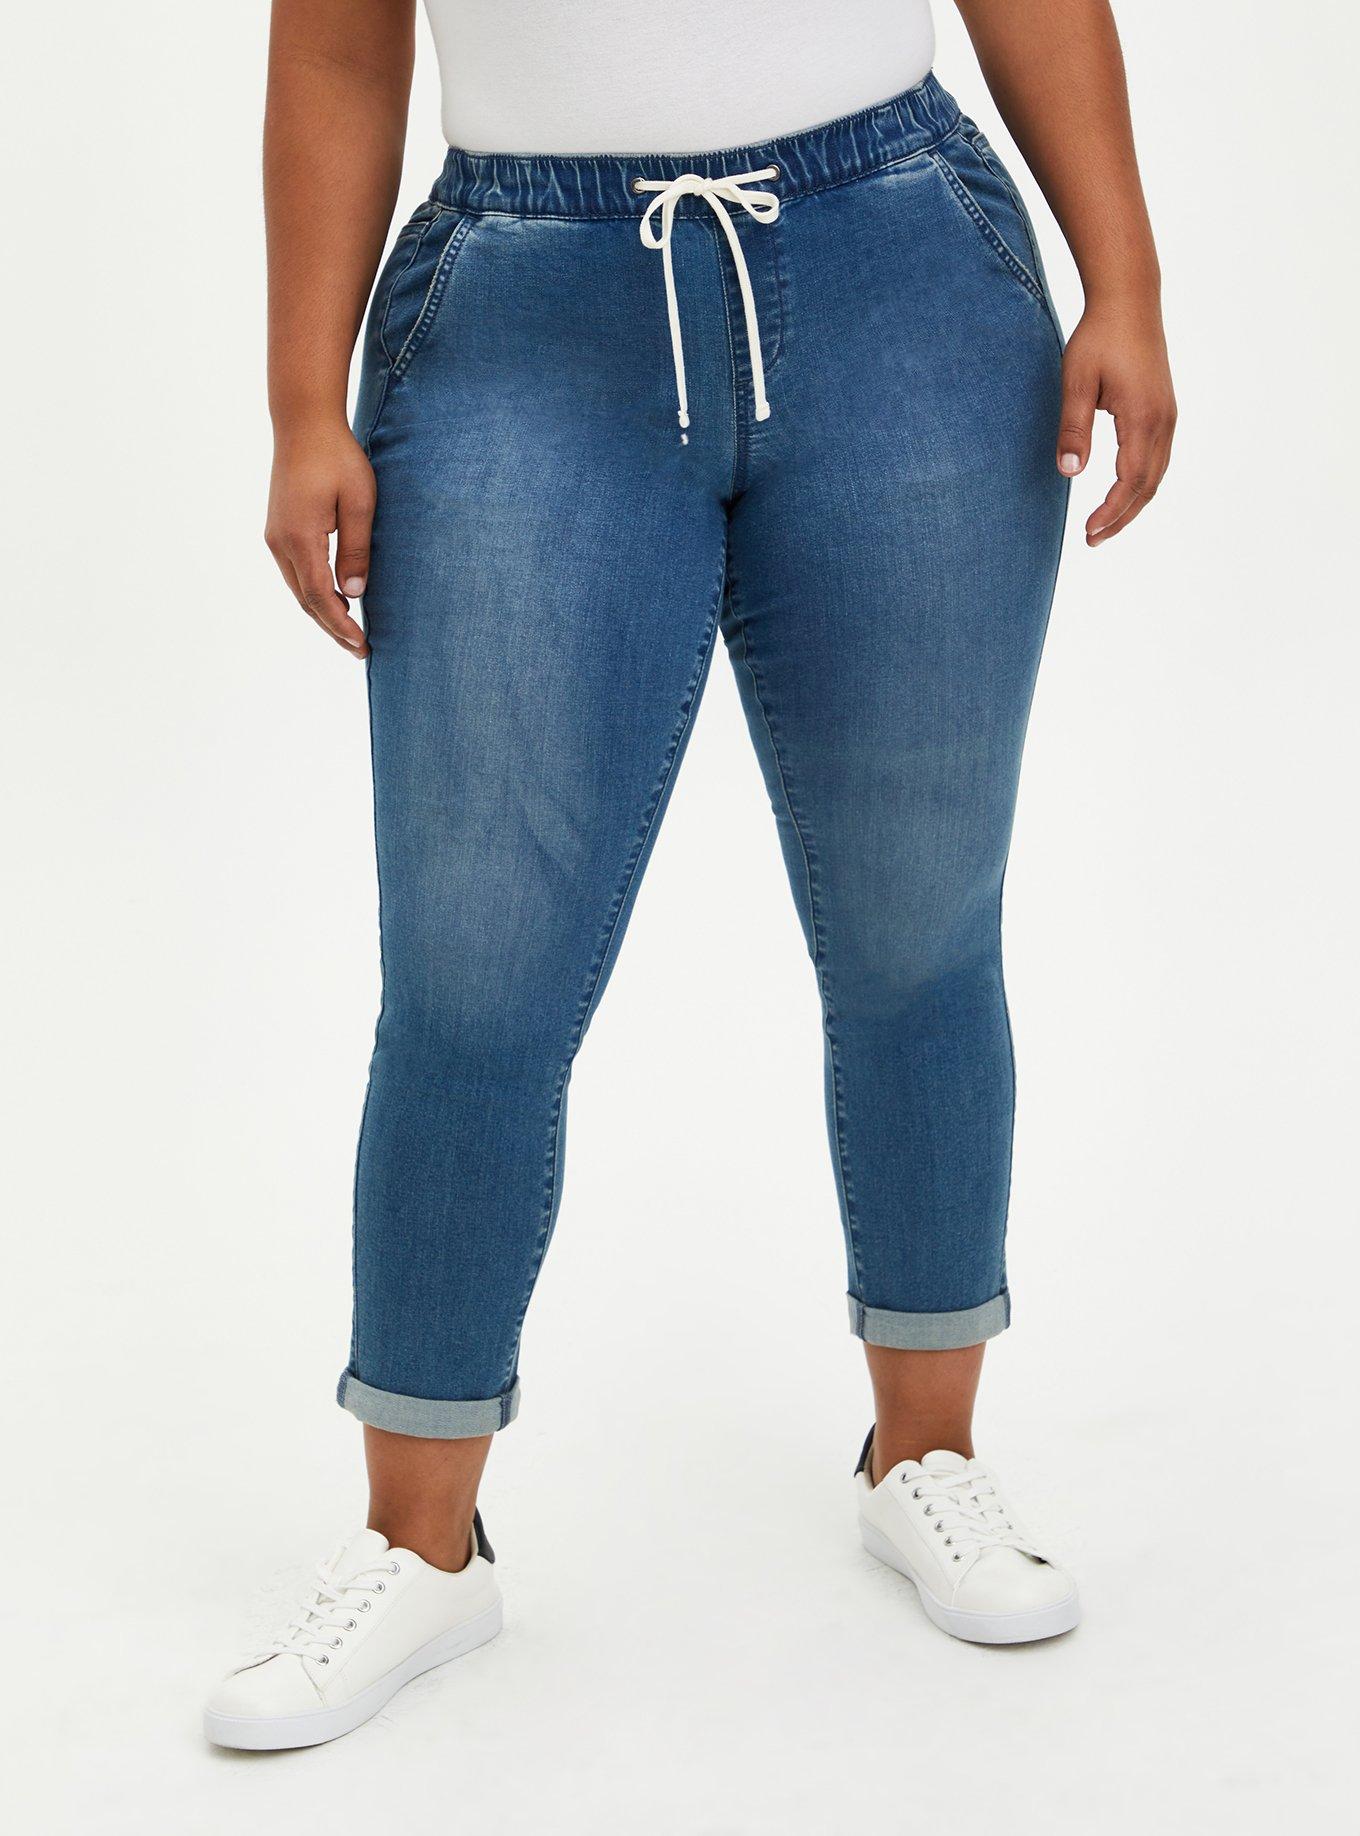 Stretchable Denim Black Flared Jeans  Baggy jeans, mid waist jogger jeans  for girls, plus size